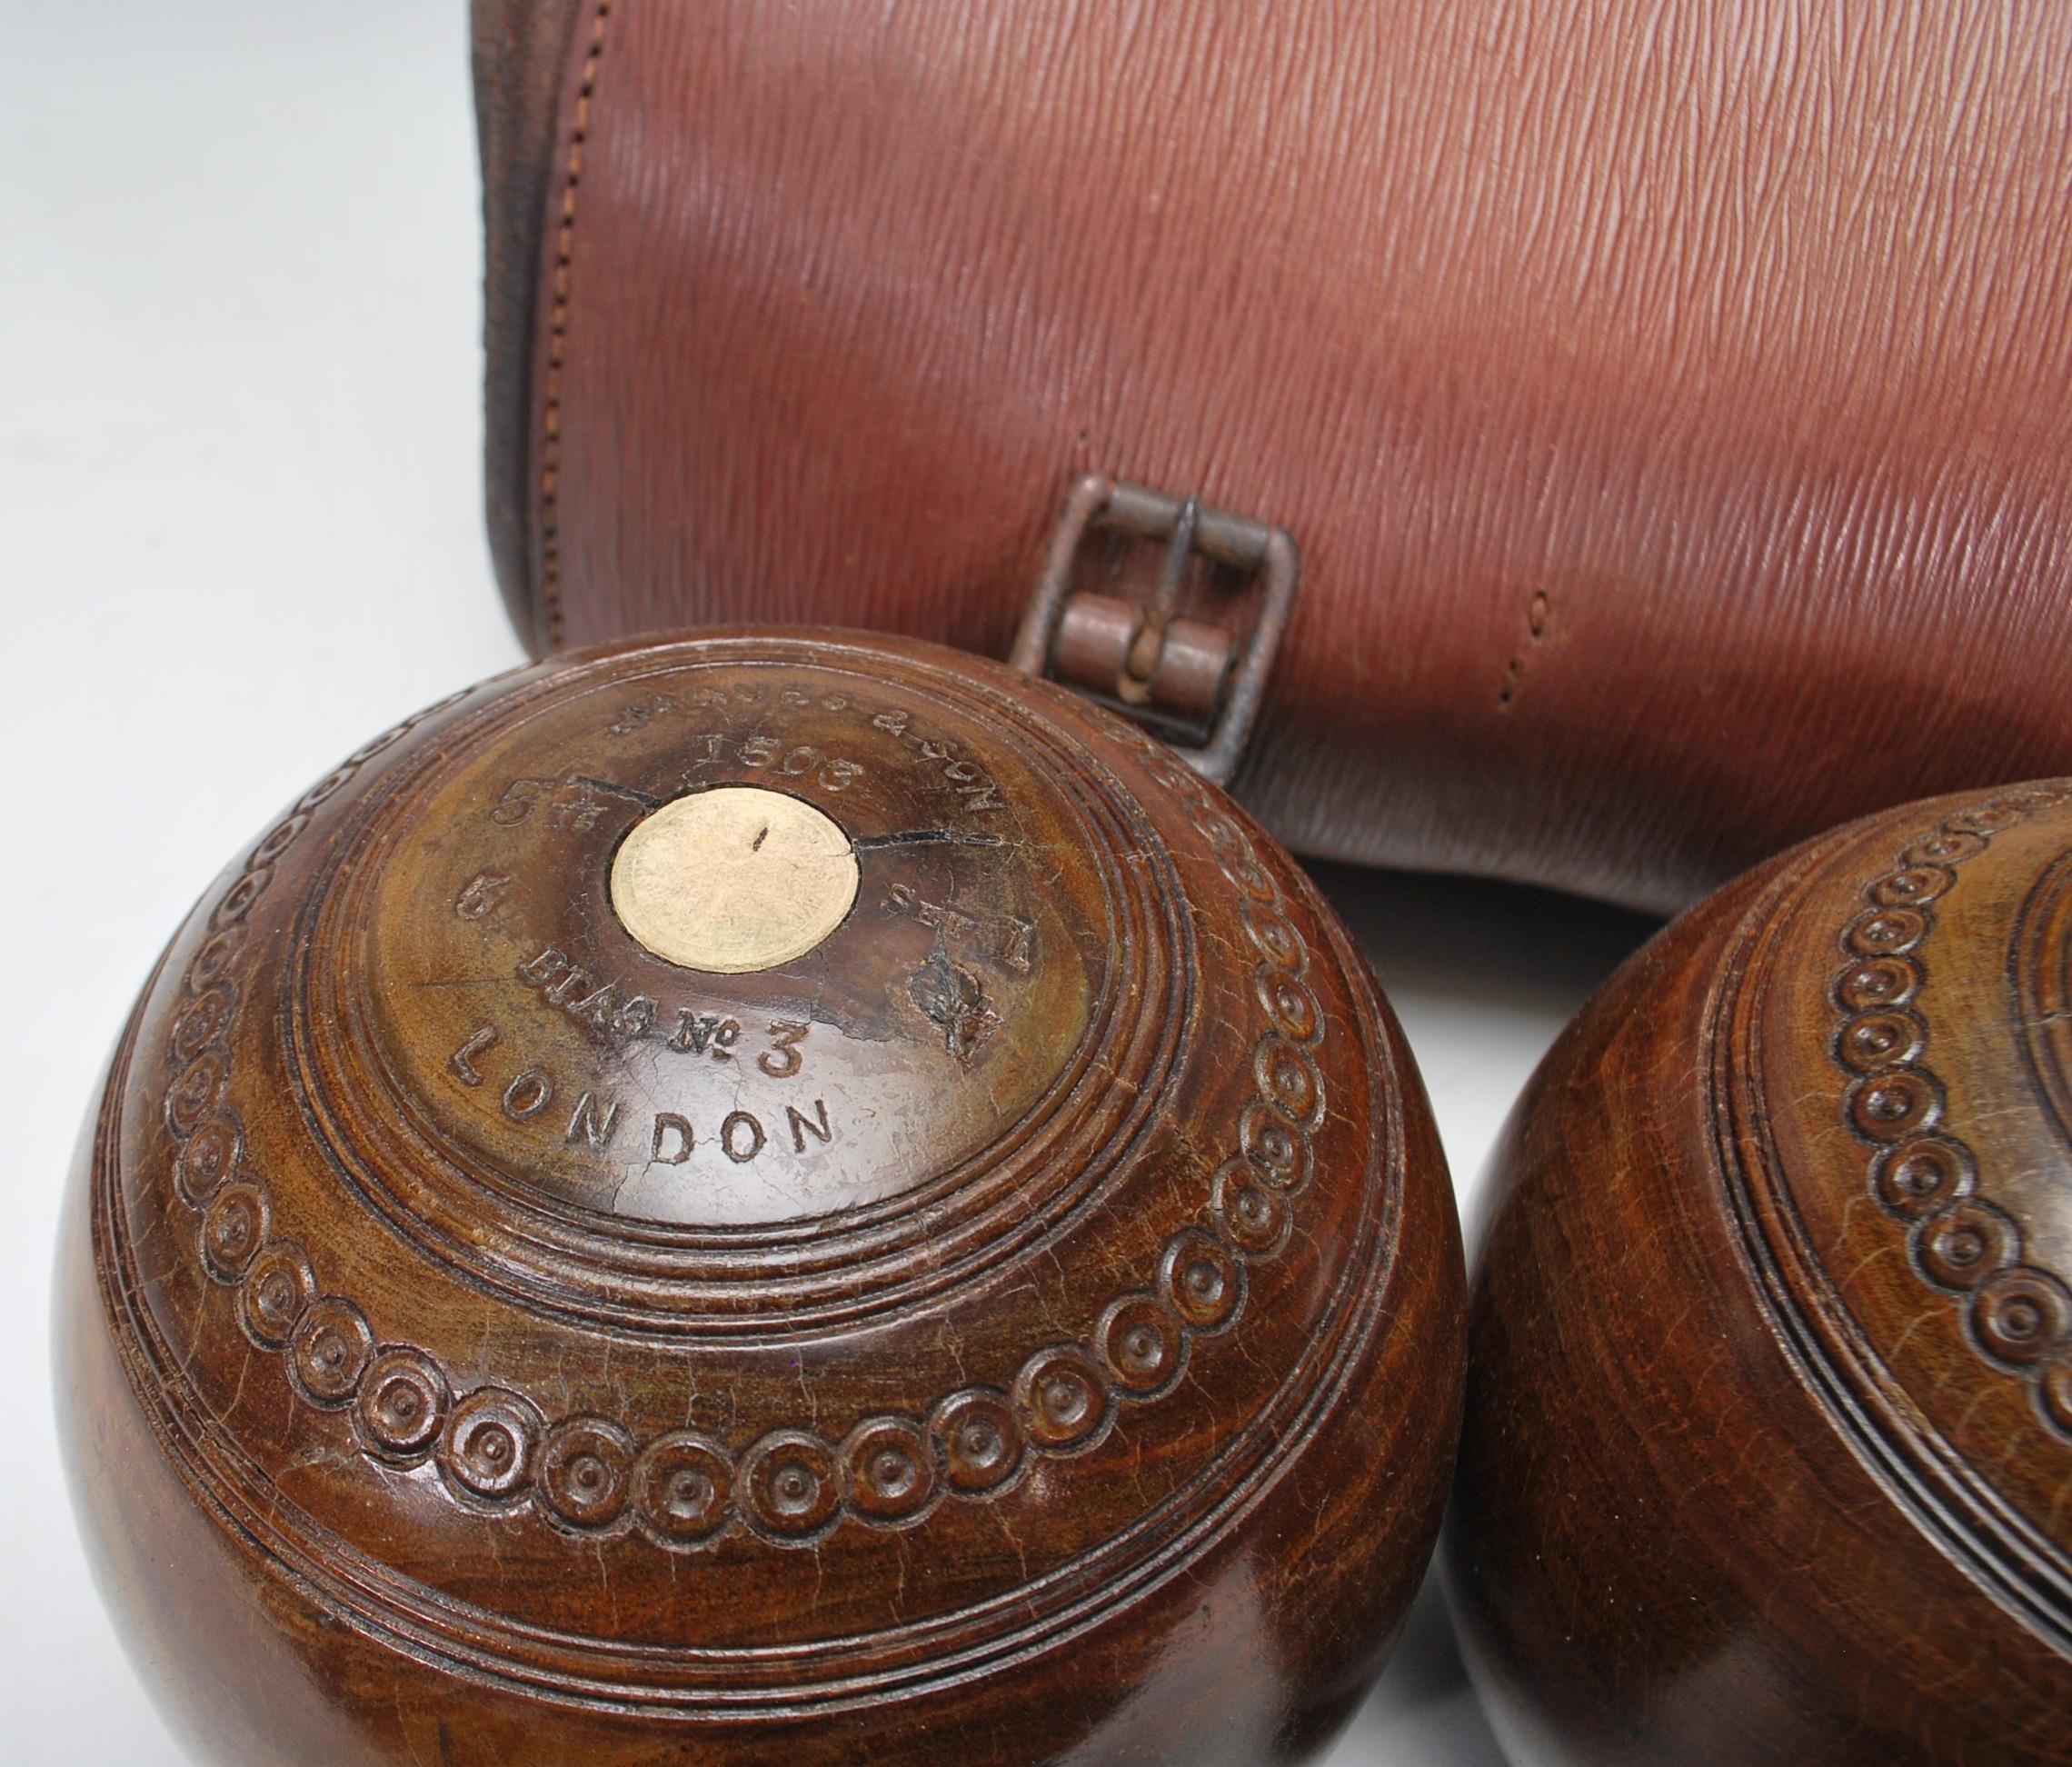 Crown Green Bowls - A set of three early 20th century vintage lignum vitae bowling bowls, in - Image 6 of 6